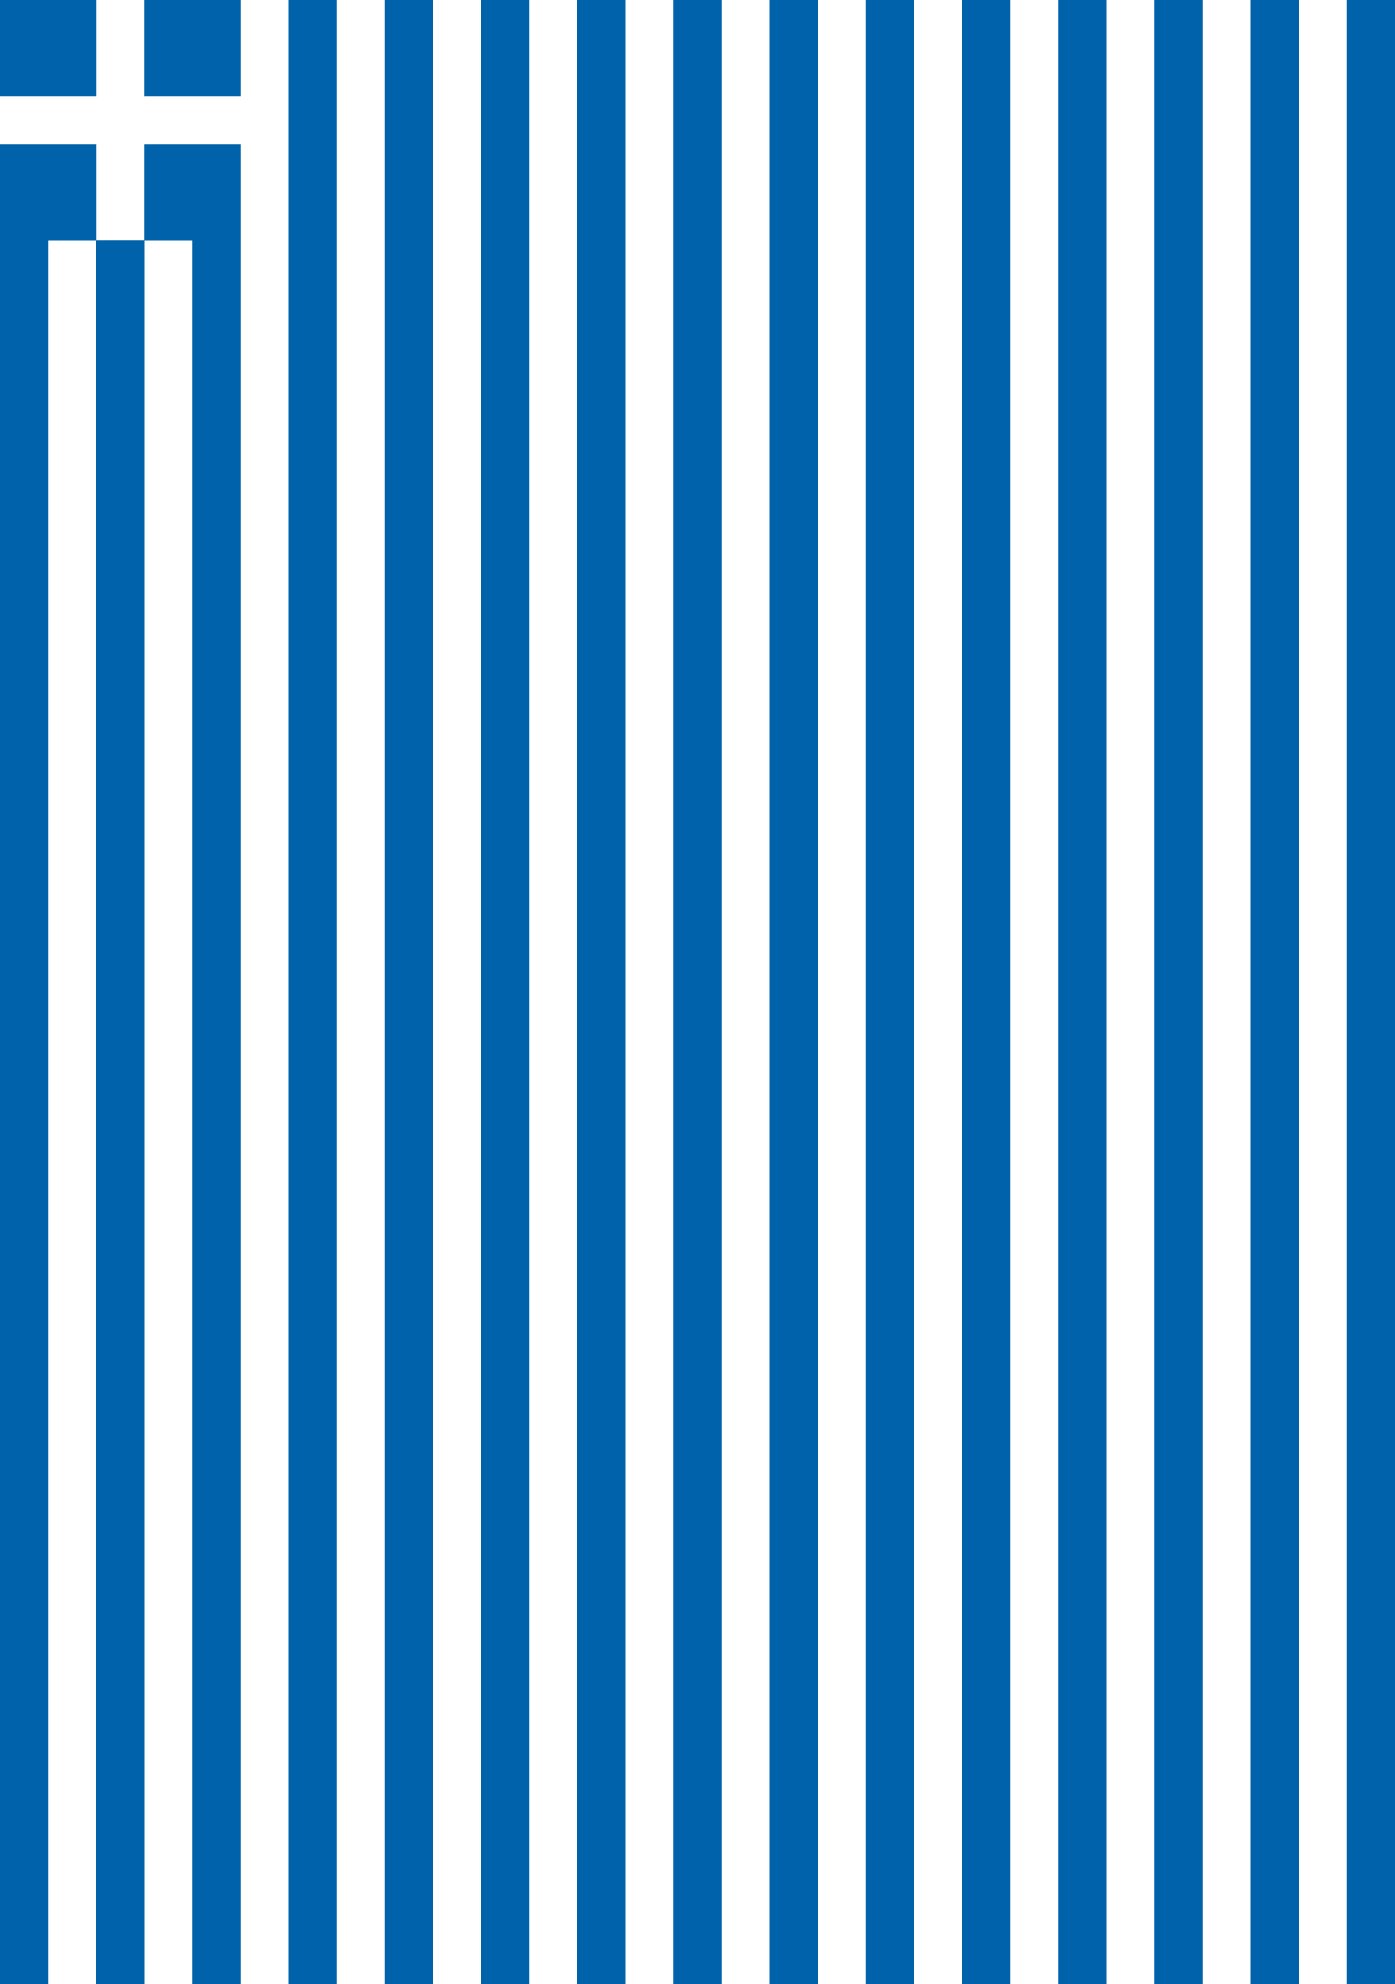 The Greek flag redesigned by Zak Group